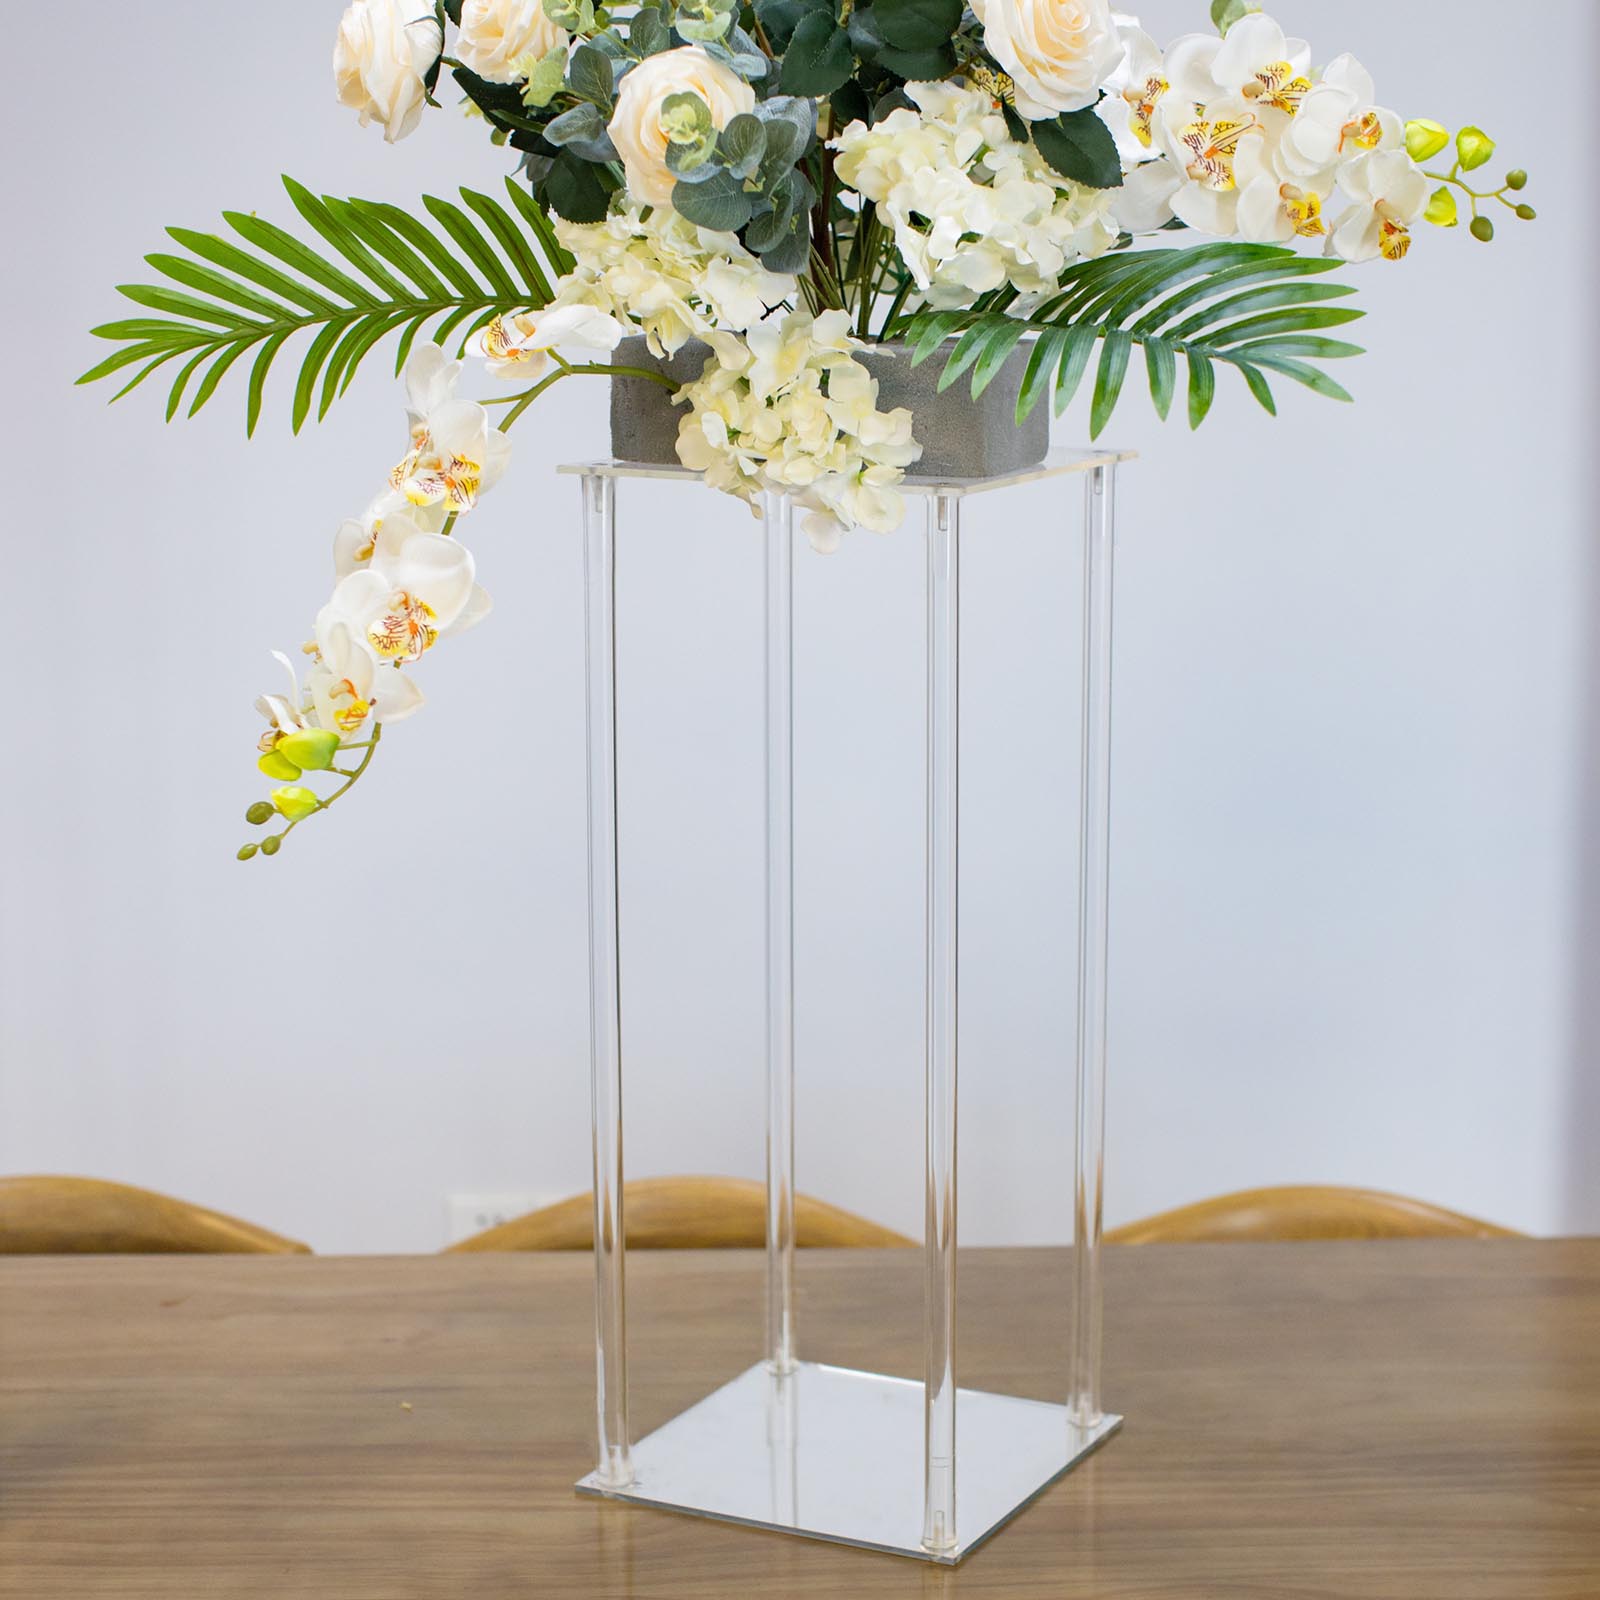 24" Clear Flower Vase Pillar Column Stand With Square Mirror Base, Wedding Table Centerpiece